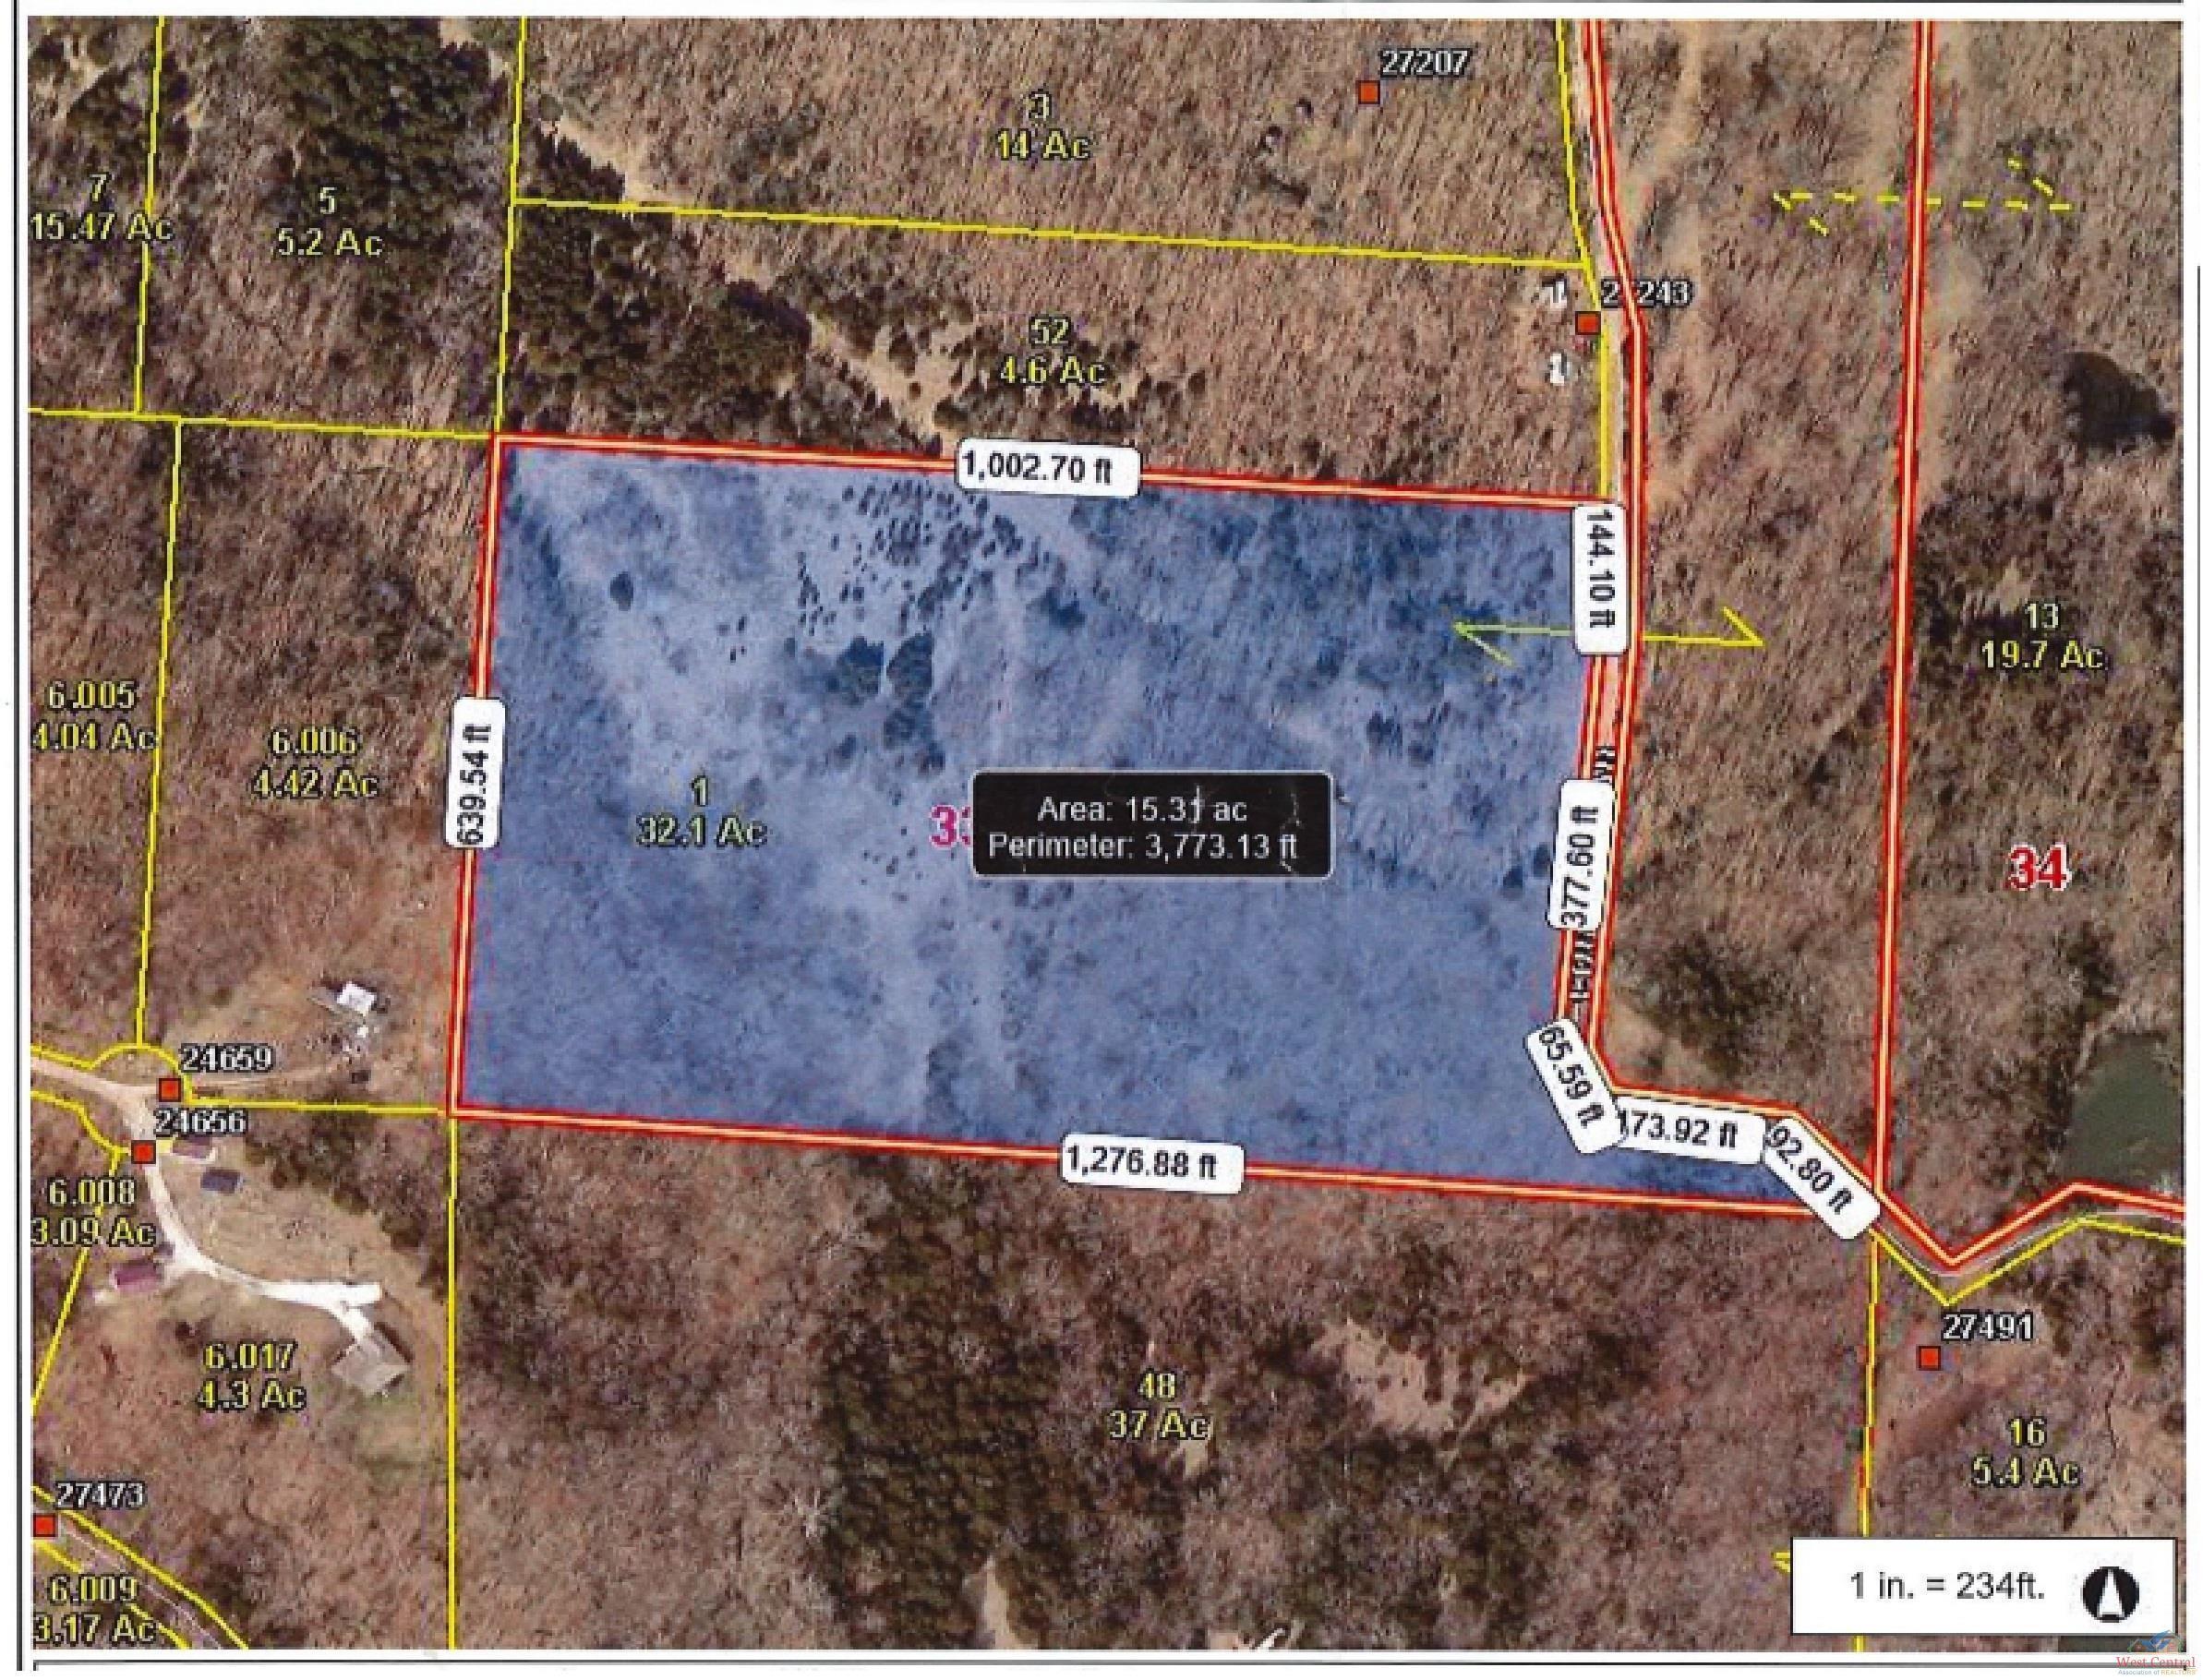 Property Image for 15 Ac Off County